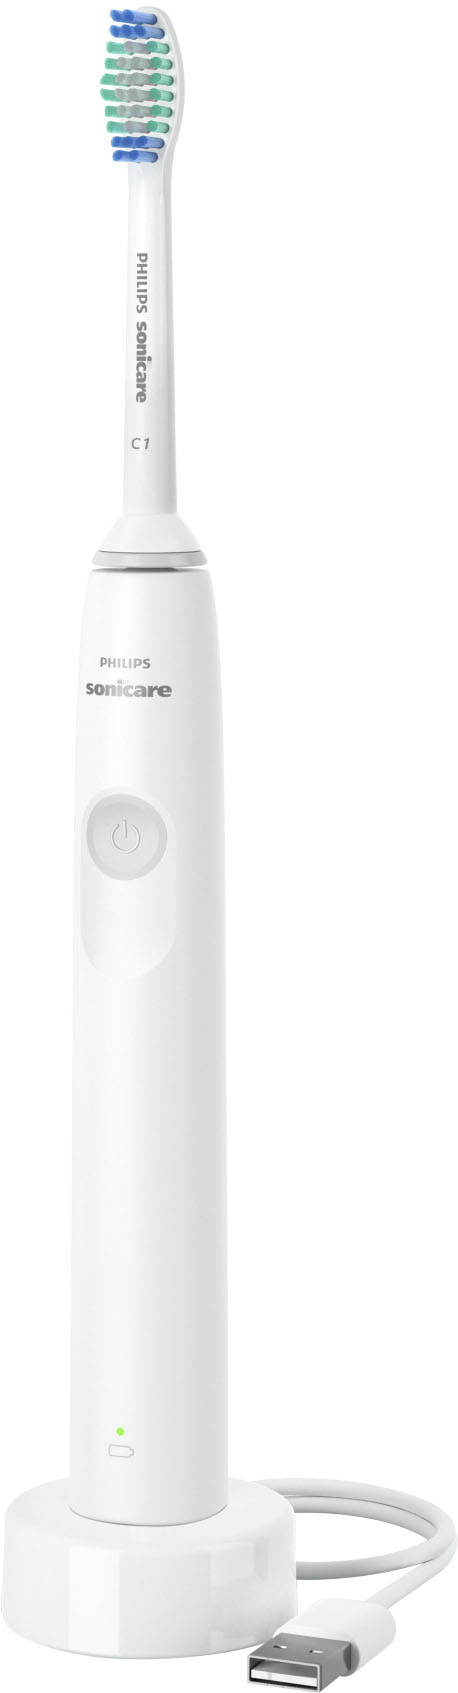 Philips Sonicare 1100 Power Toothbrush, Rechargeable Electric Toothbrush  White Grey HX3641/02 Best Buy